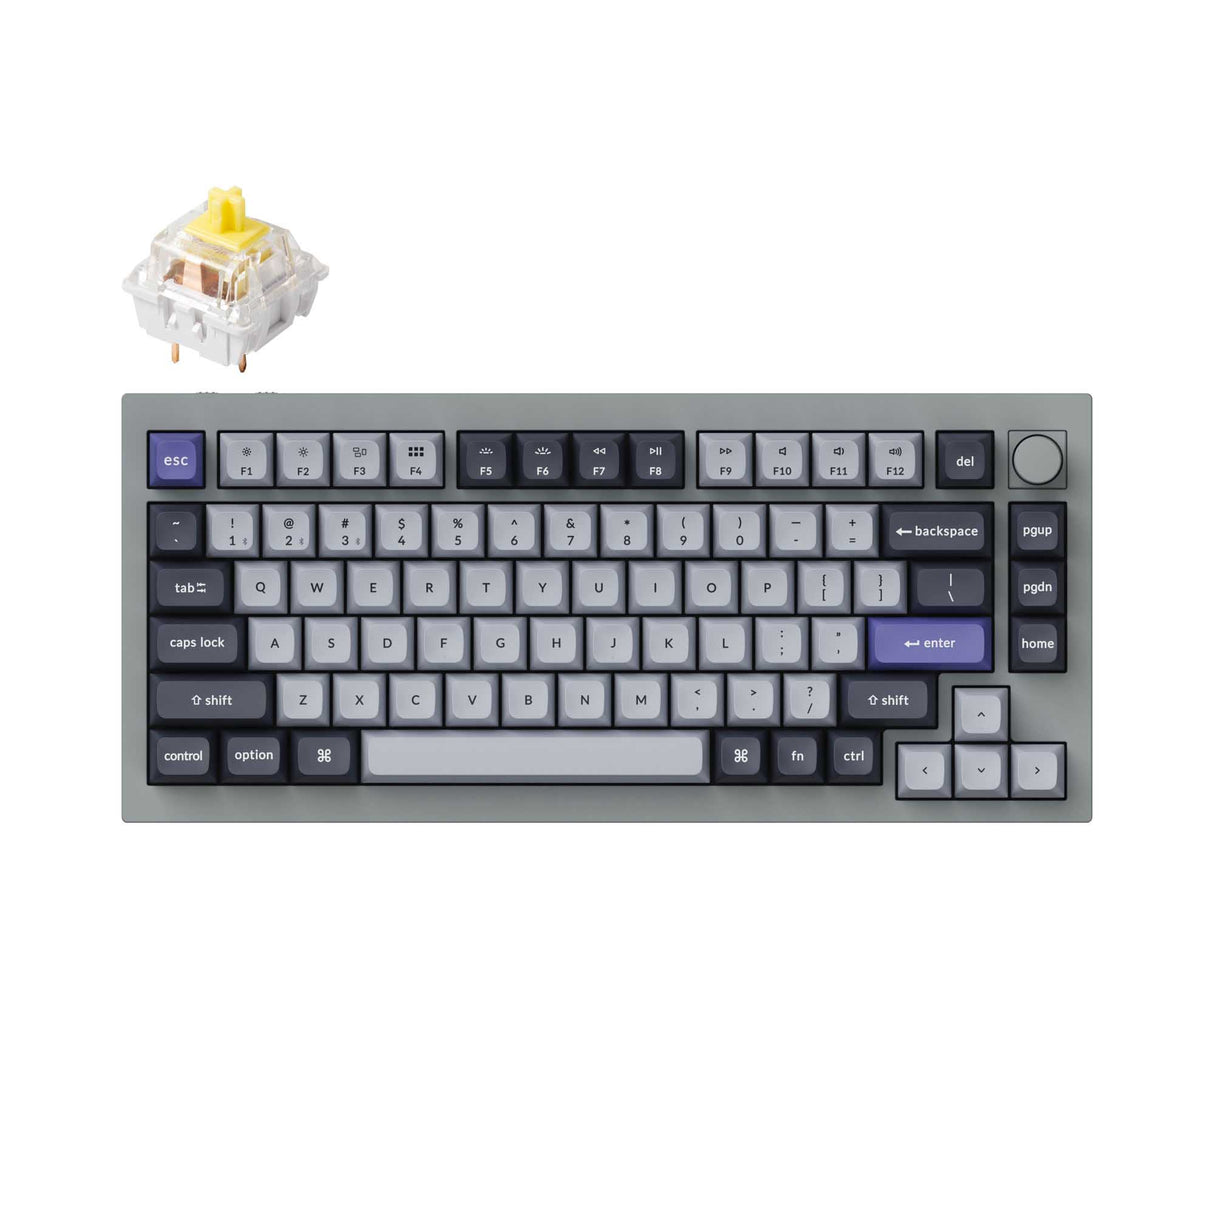 Keychron Q1 Pro QMK/VIA wireless custom mechanical keyboard 75% layout full aluminum grey frame for Mac WIndows Linux with RGB backlight and hot-swappable K Pro switch banana